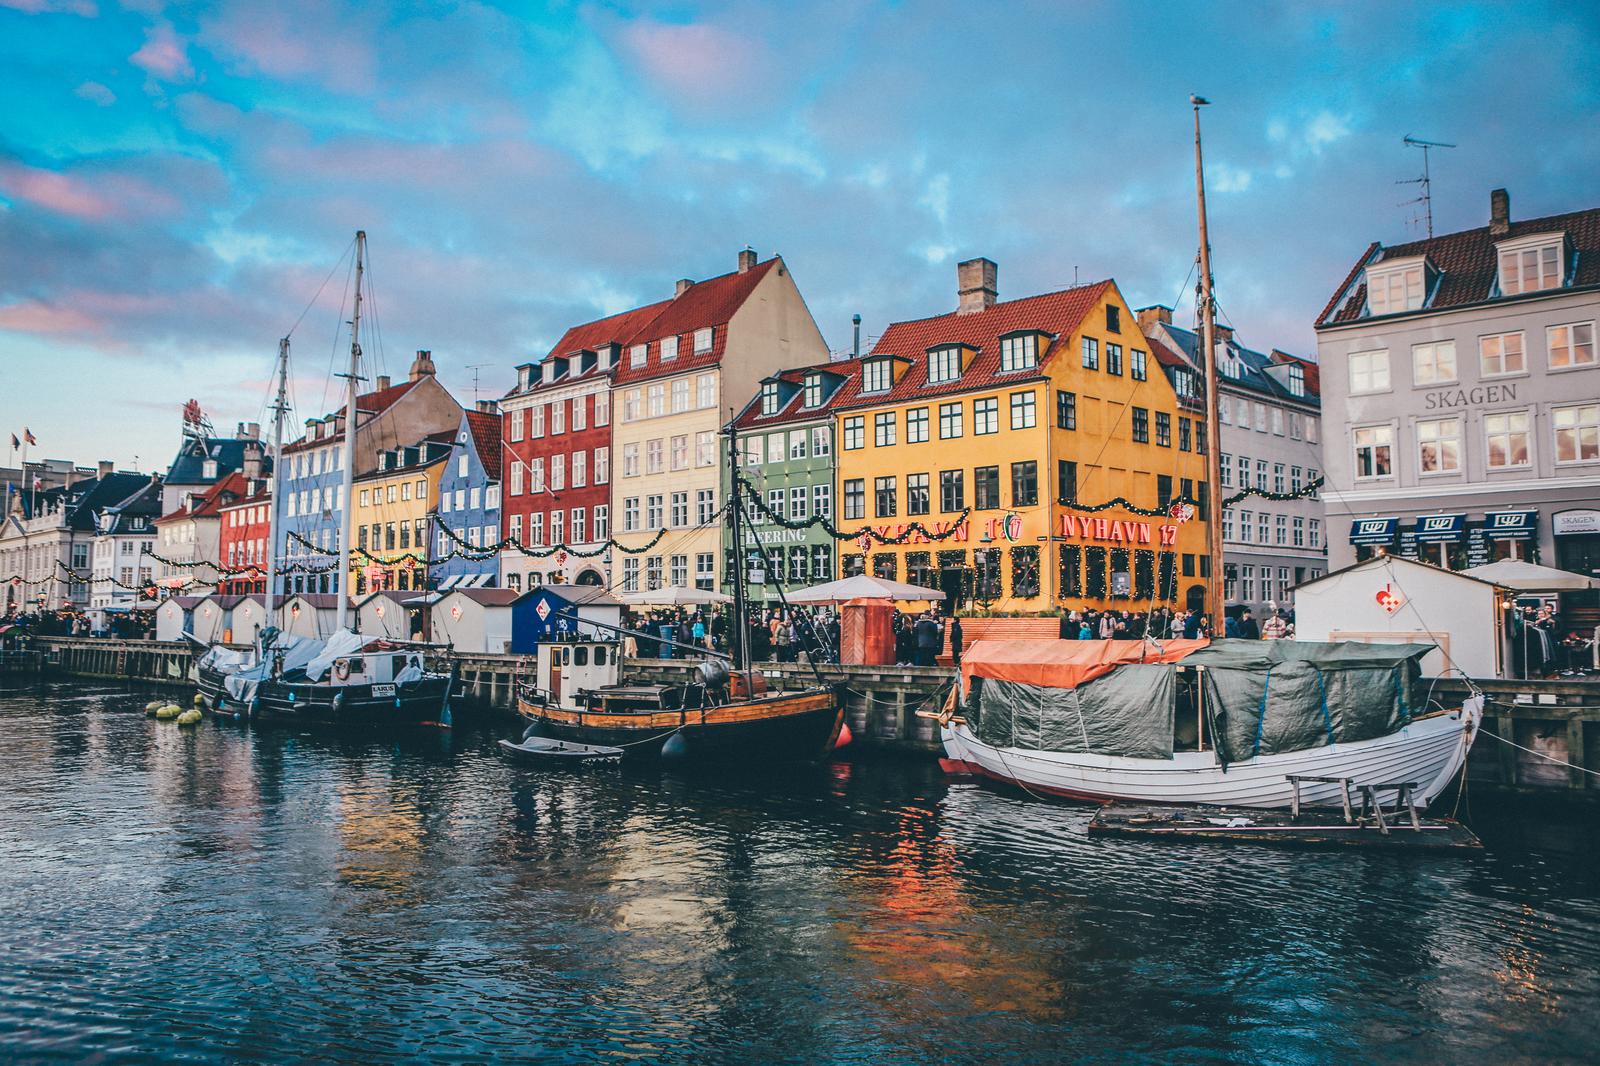 Name That City! Put Your Travel Knowledge to Test With This Picture Quiz! Copenhagen, Denmark